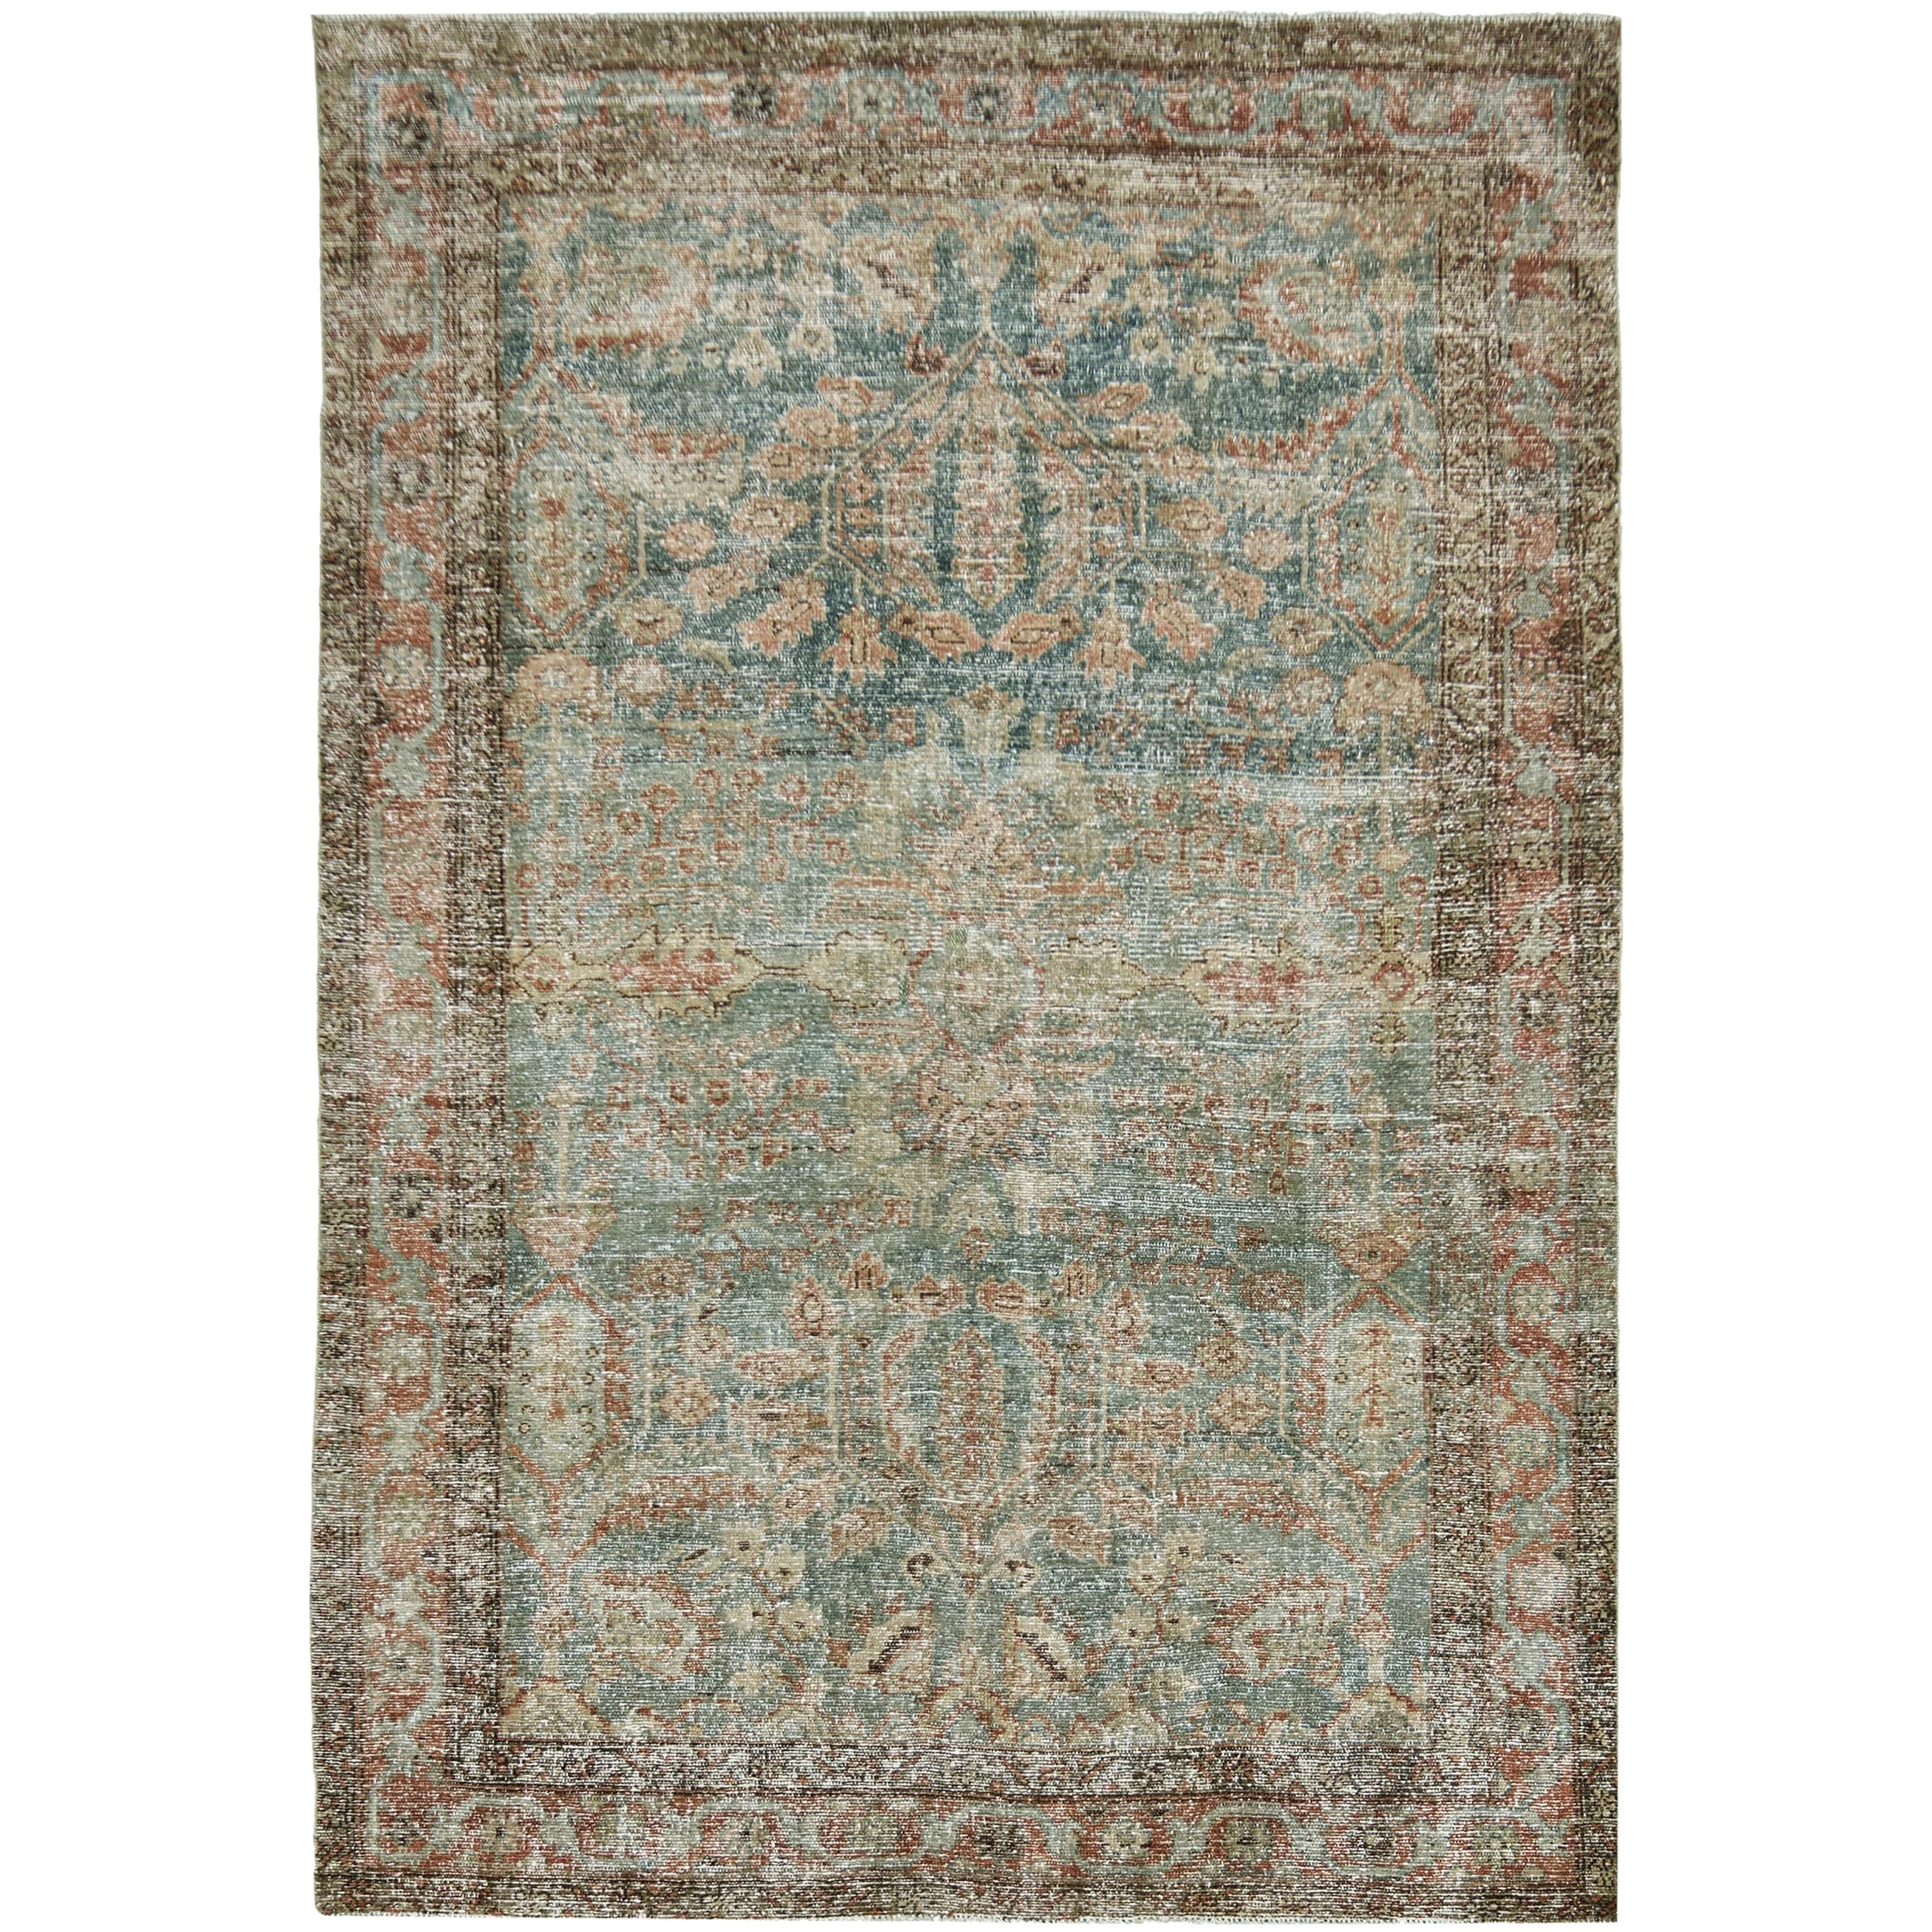 Antique Persian Mahal by Mehraban Rugs